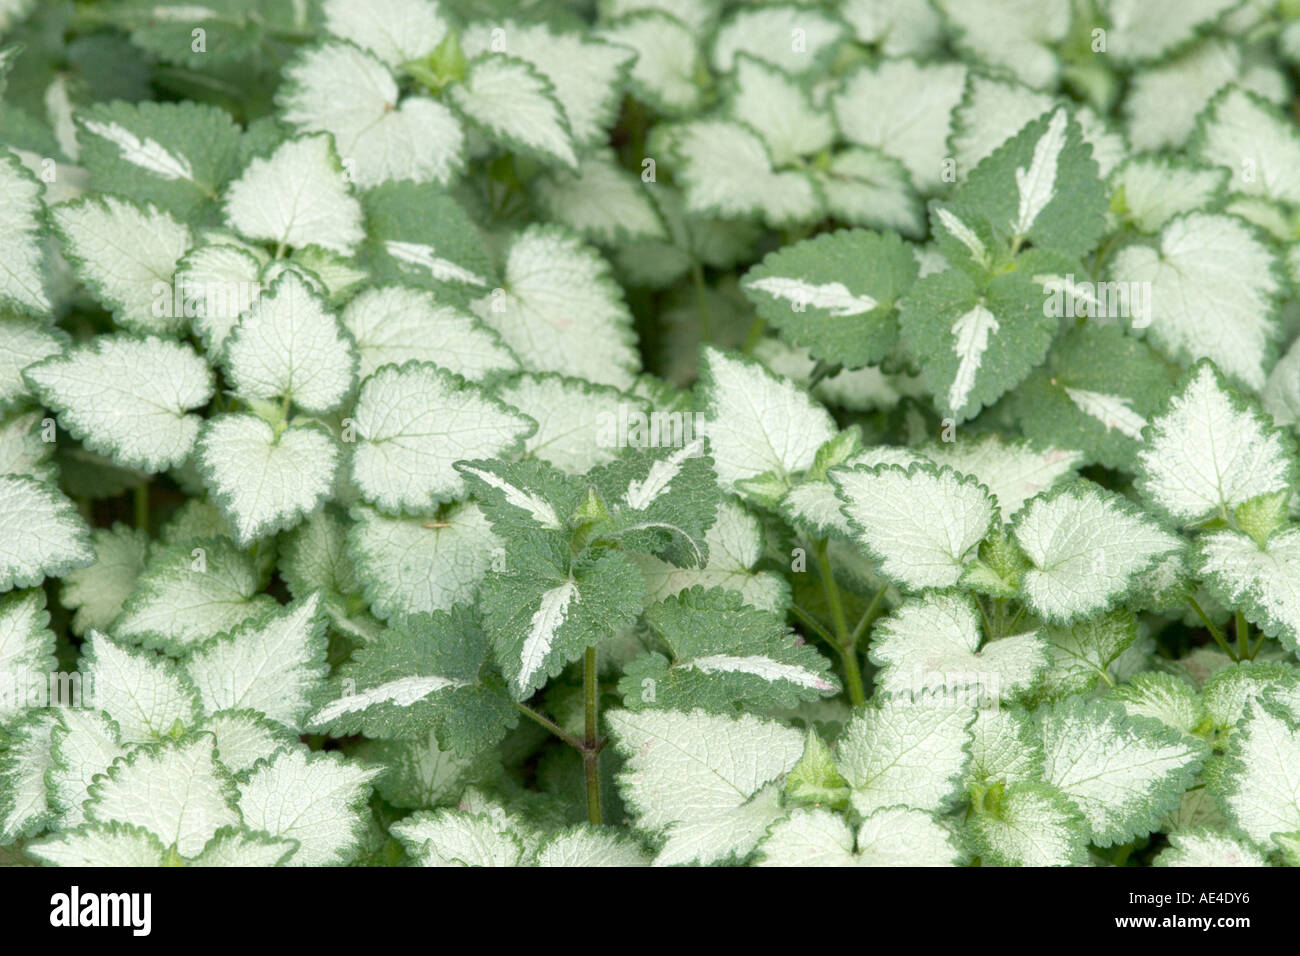 Triangular patterns formed by dead nettle leaves Stock Photo